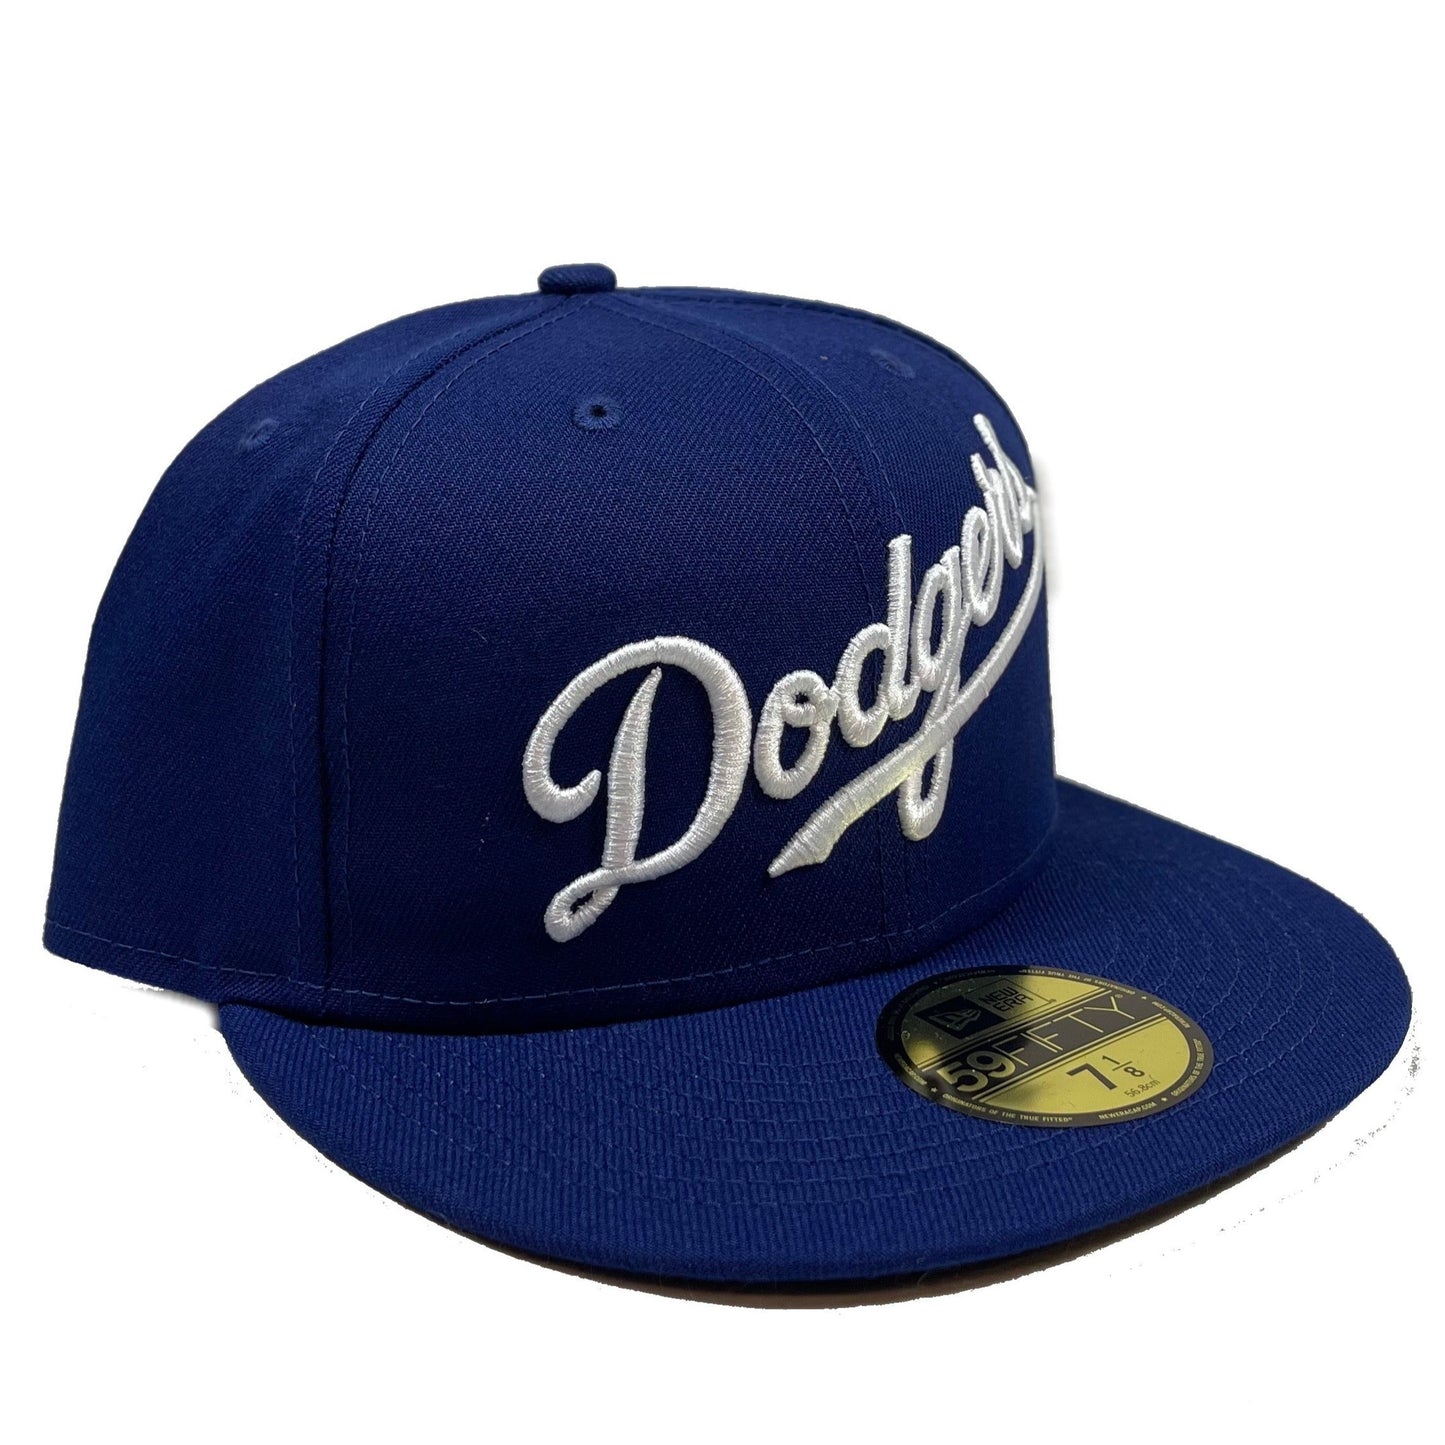 Los Angeles Dodgers (Blue) Snapback/Fitted